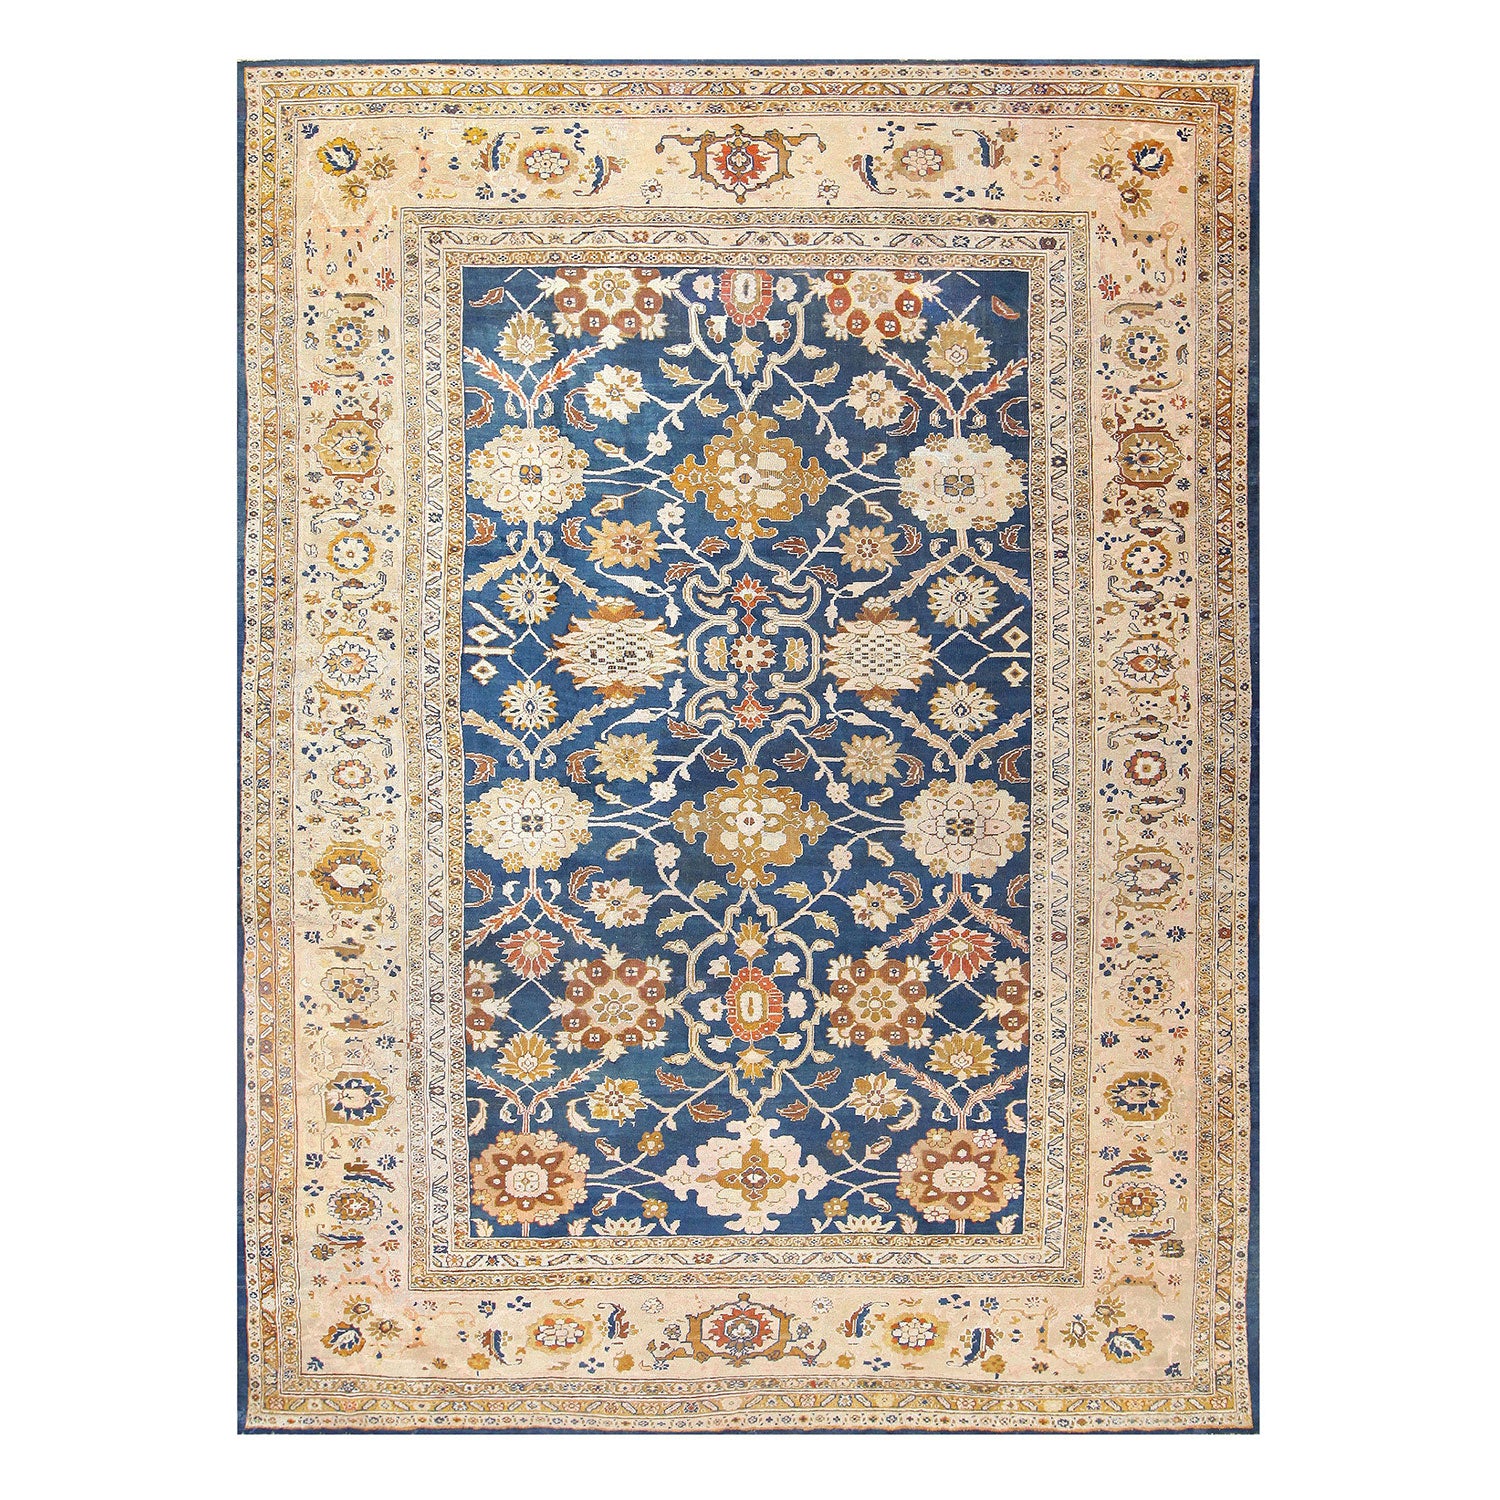 Exquisite handwoven Oriental rug with intricate floral patterns on deep blue